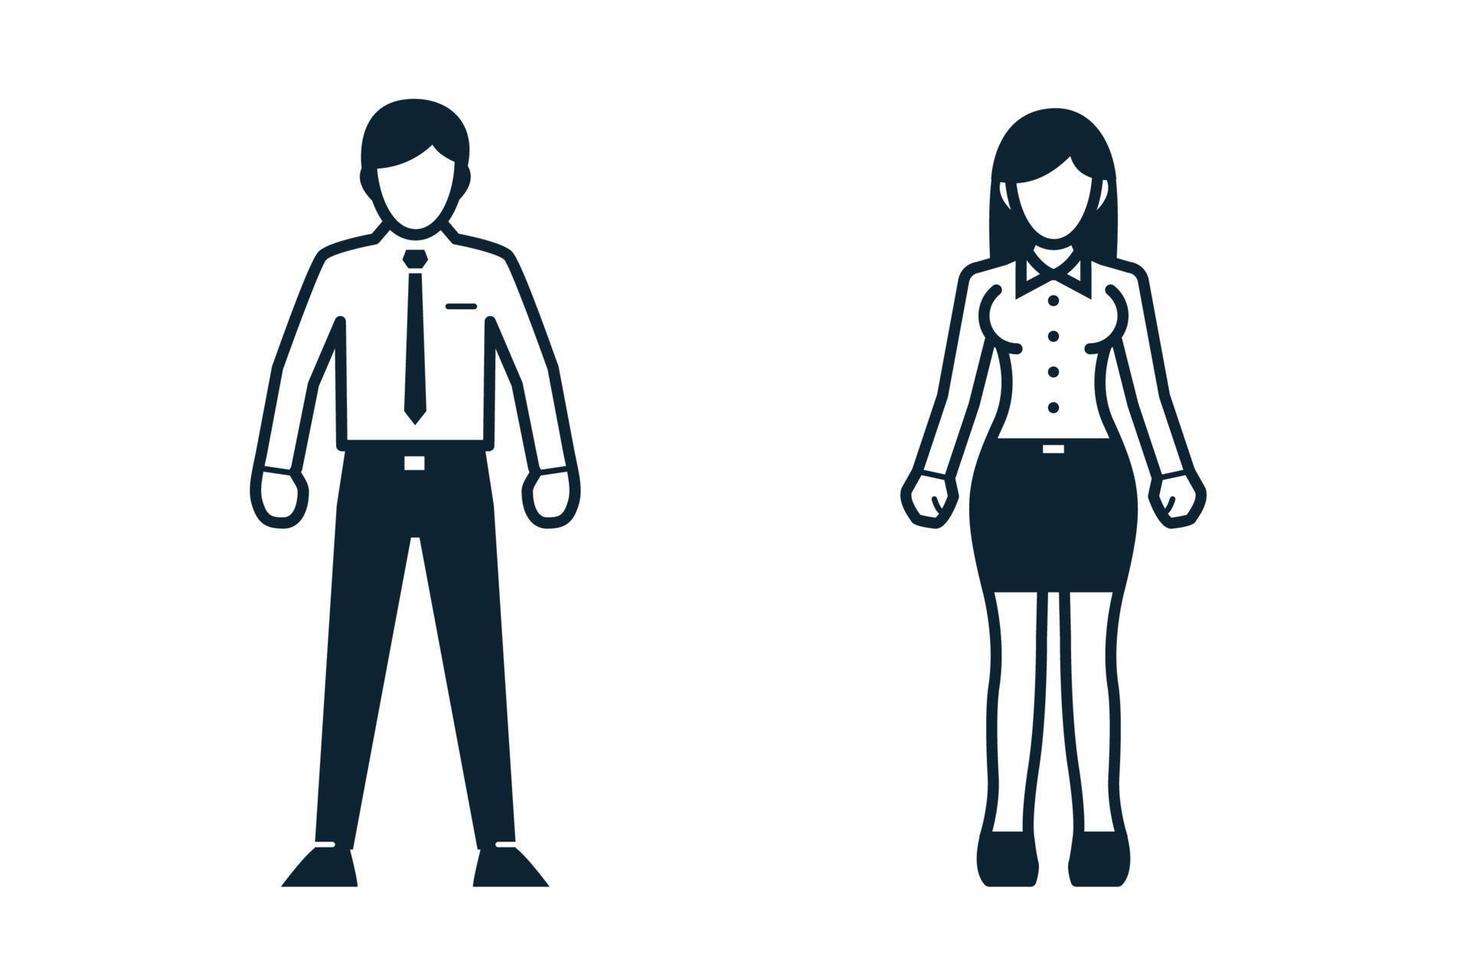 Student, Collegian, Uniform and People icons vector